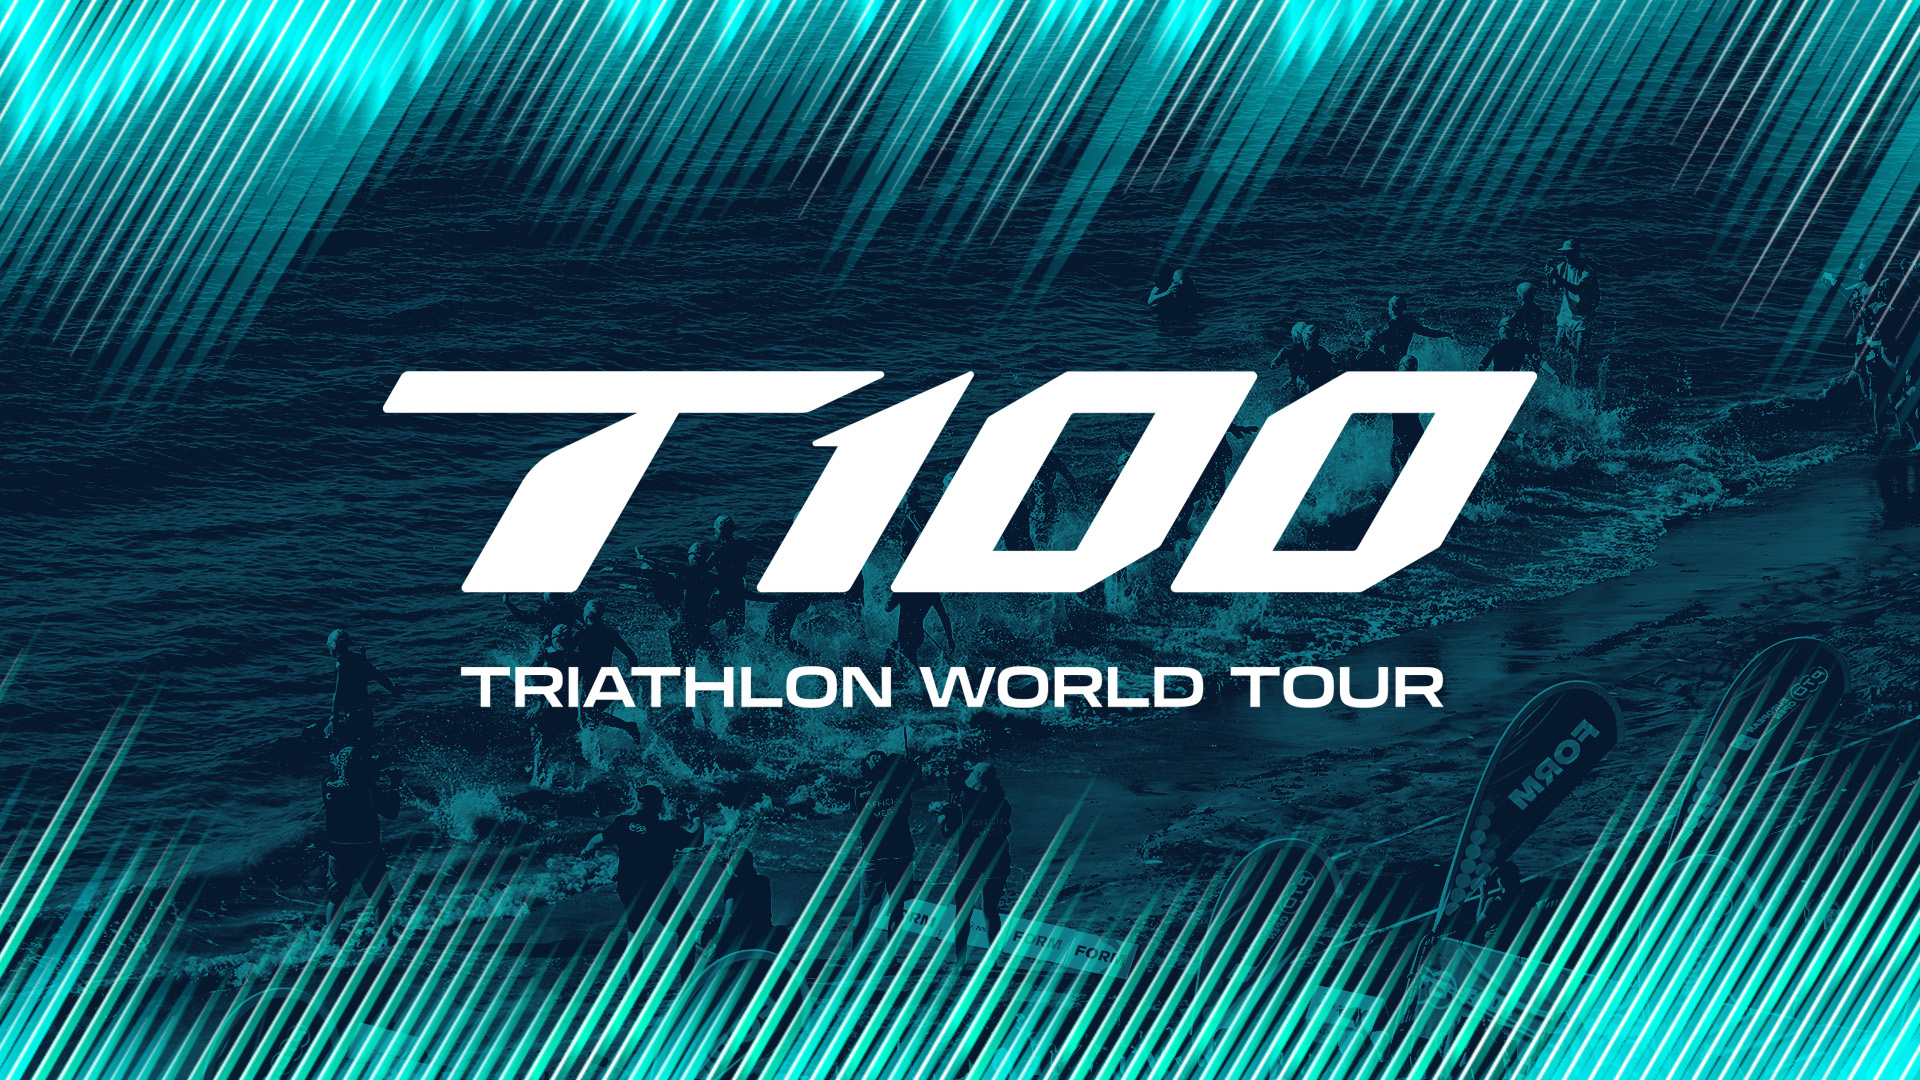 Blue background graphic showing the new T100 logo with the text TRIATHLON WORLD TOUR in white with cyan lines at the top and bottom